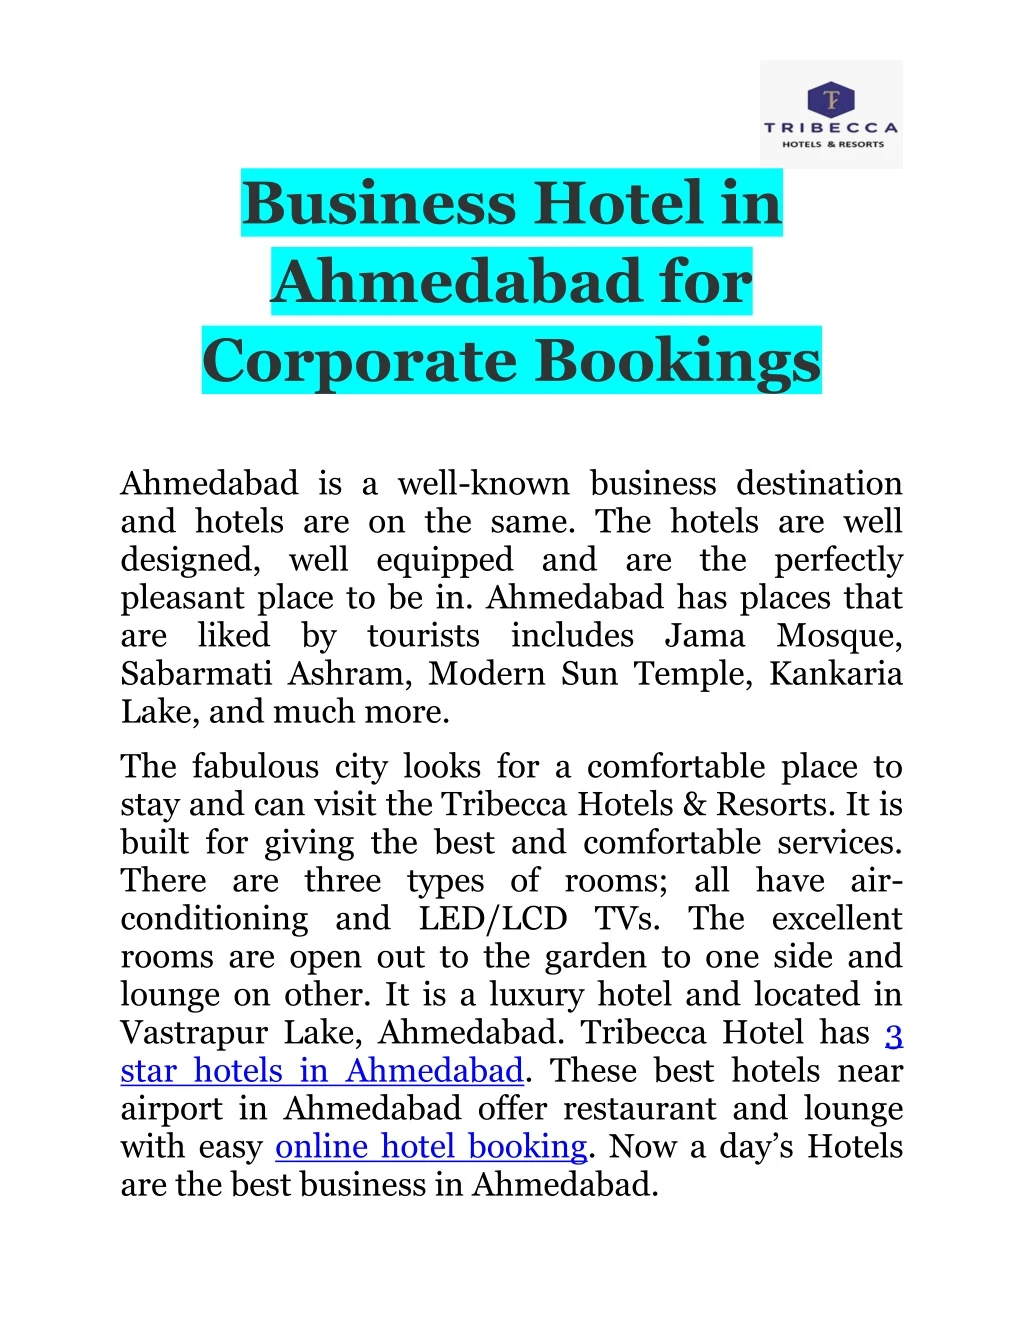 business hotel in ahmedabad for corporate bookings